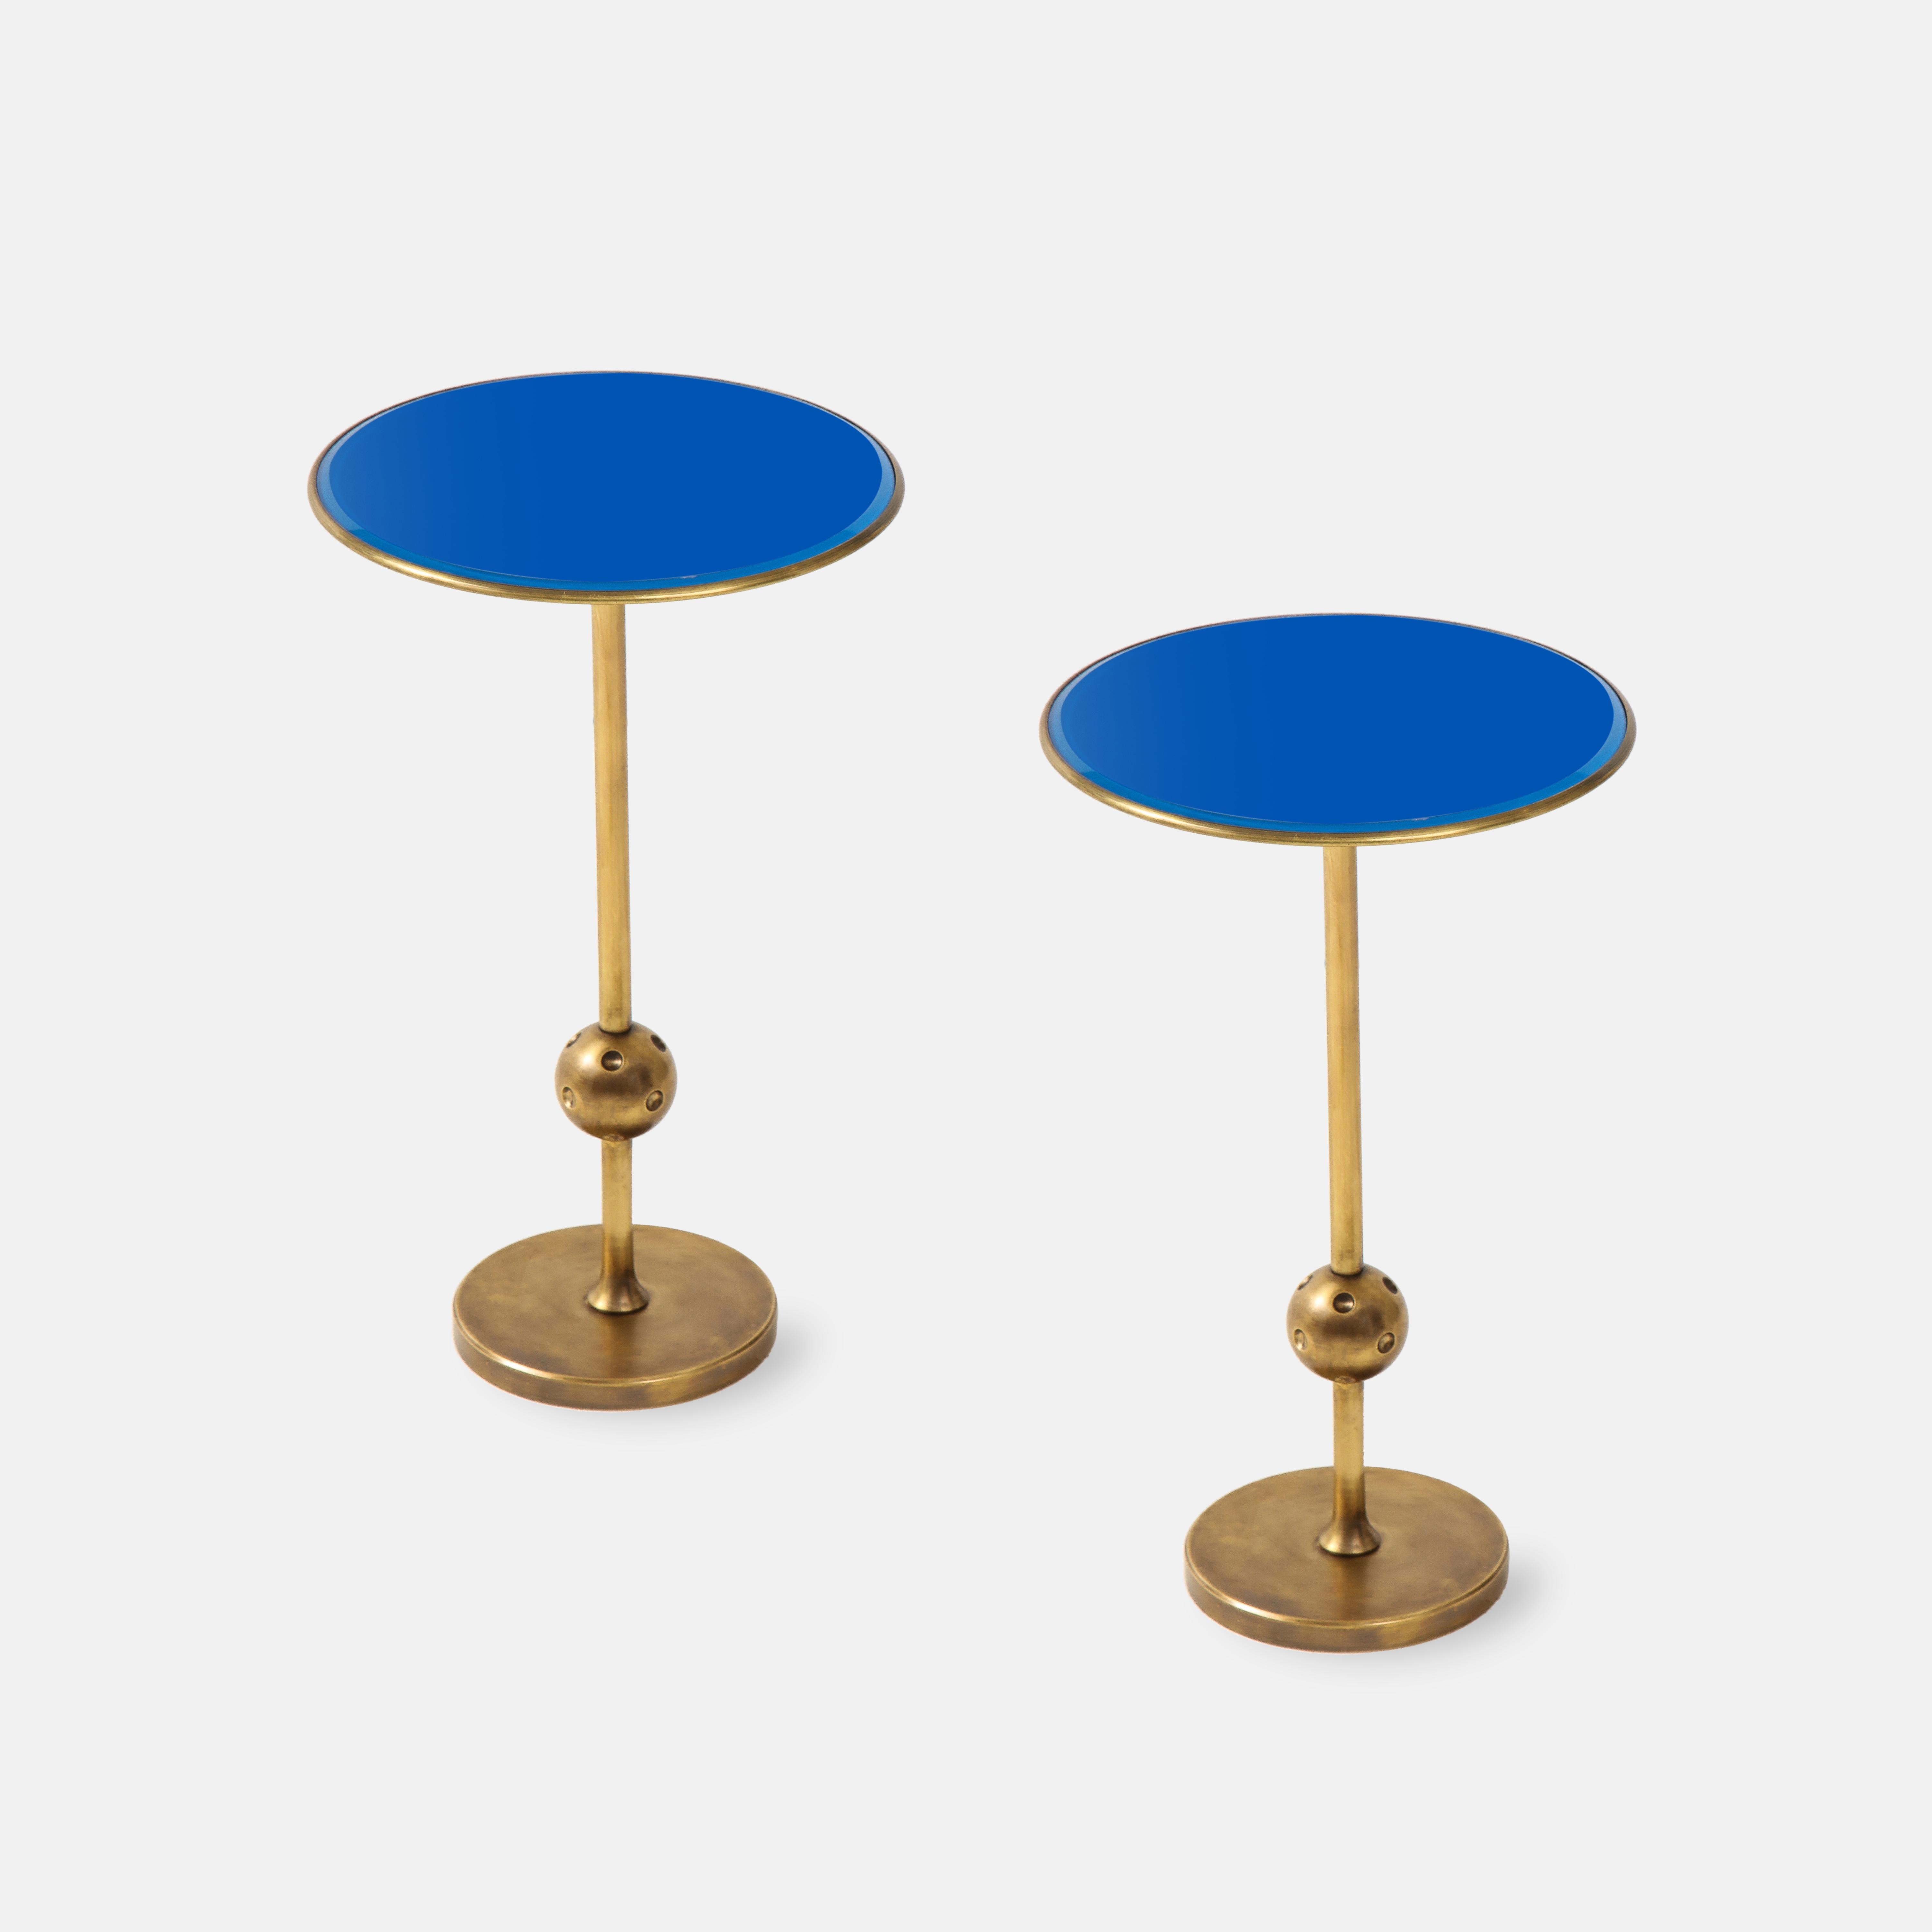 Osvaldo Borsani for Tecno rare pair of chic side tables model T1 with inset reverse painted blue beveled glass tops on brass pedestal bases with floating orb decoration.

Literature:
Giuliana Gramigna and Fulvio Irace, Osvaldo Borsani, Rome,